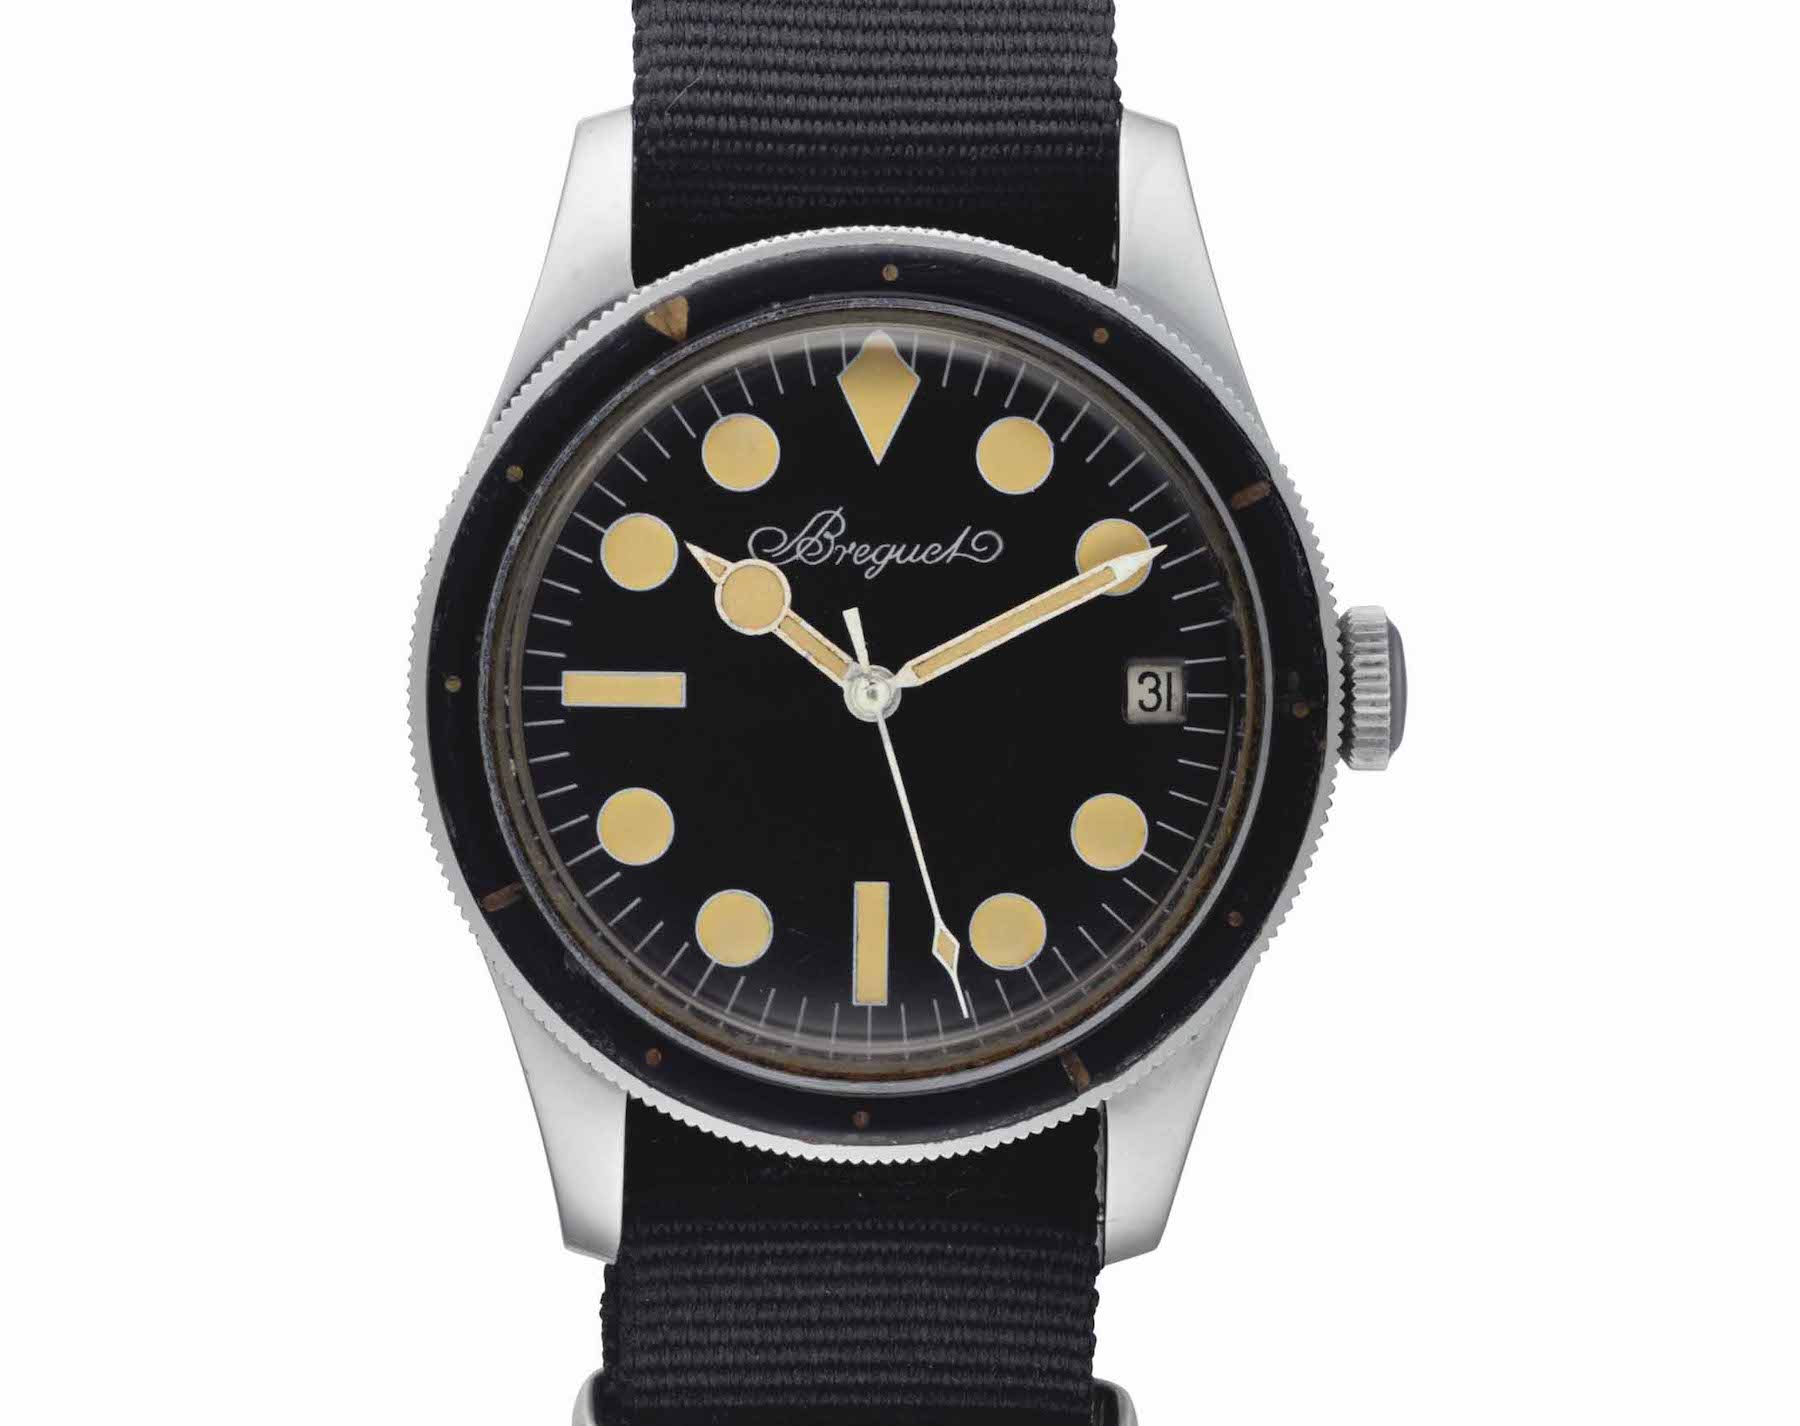 An example of this rare Breguet Diver, as worn by Dan Gurney in 1965 - Image by Christie's